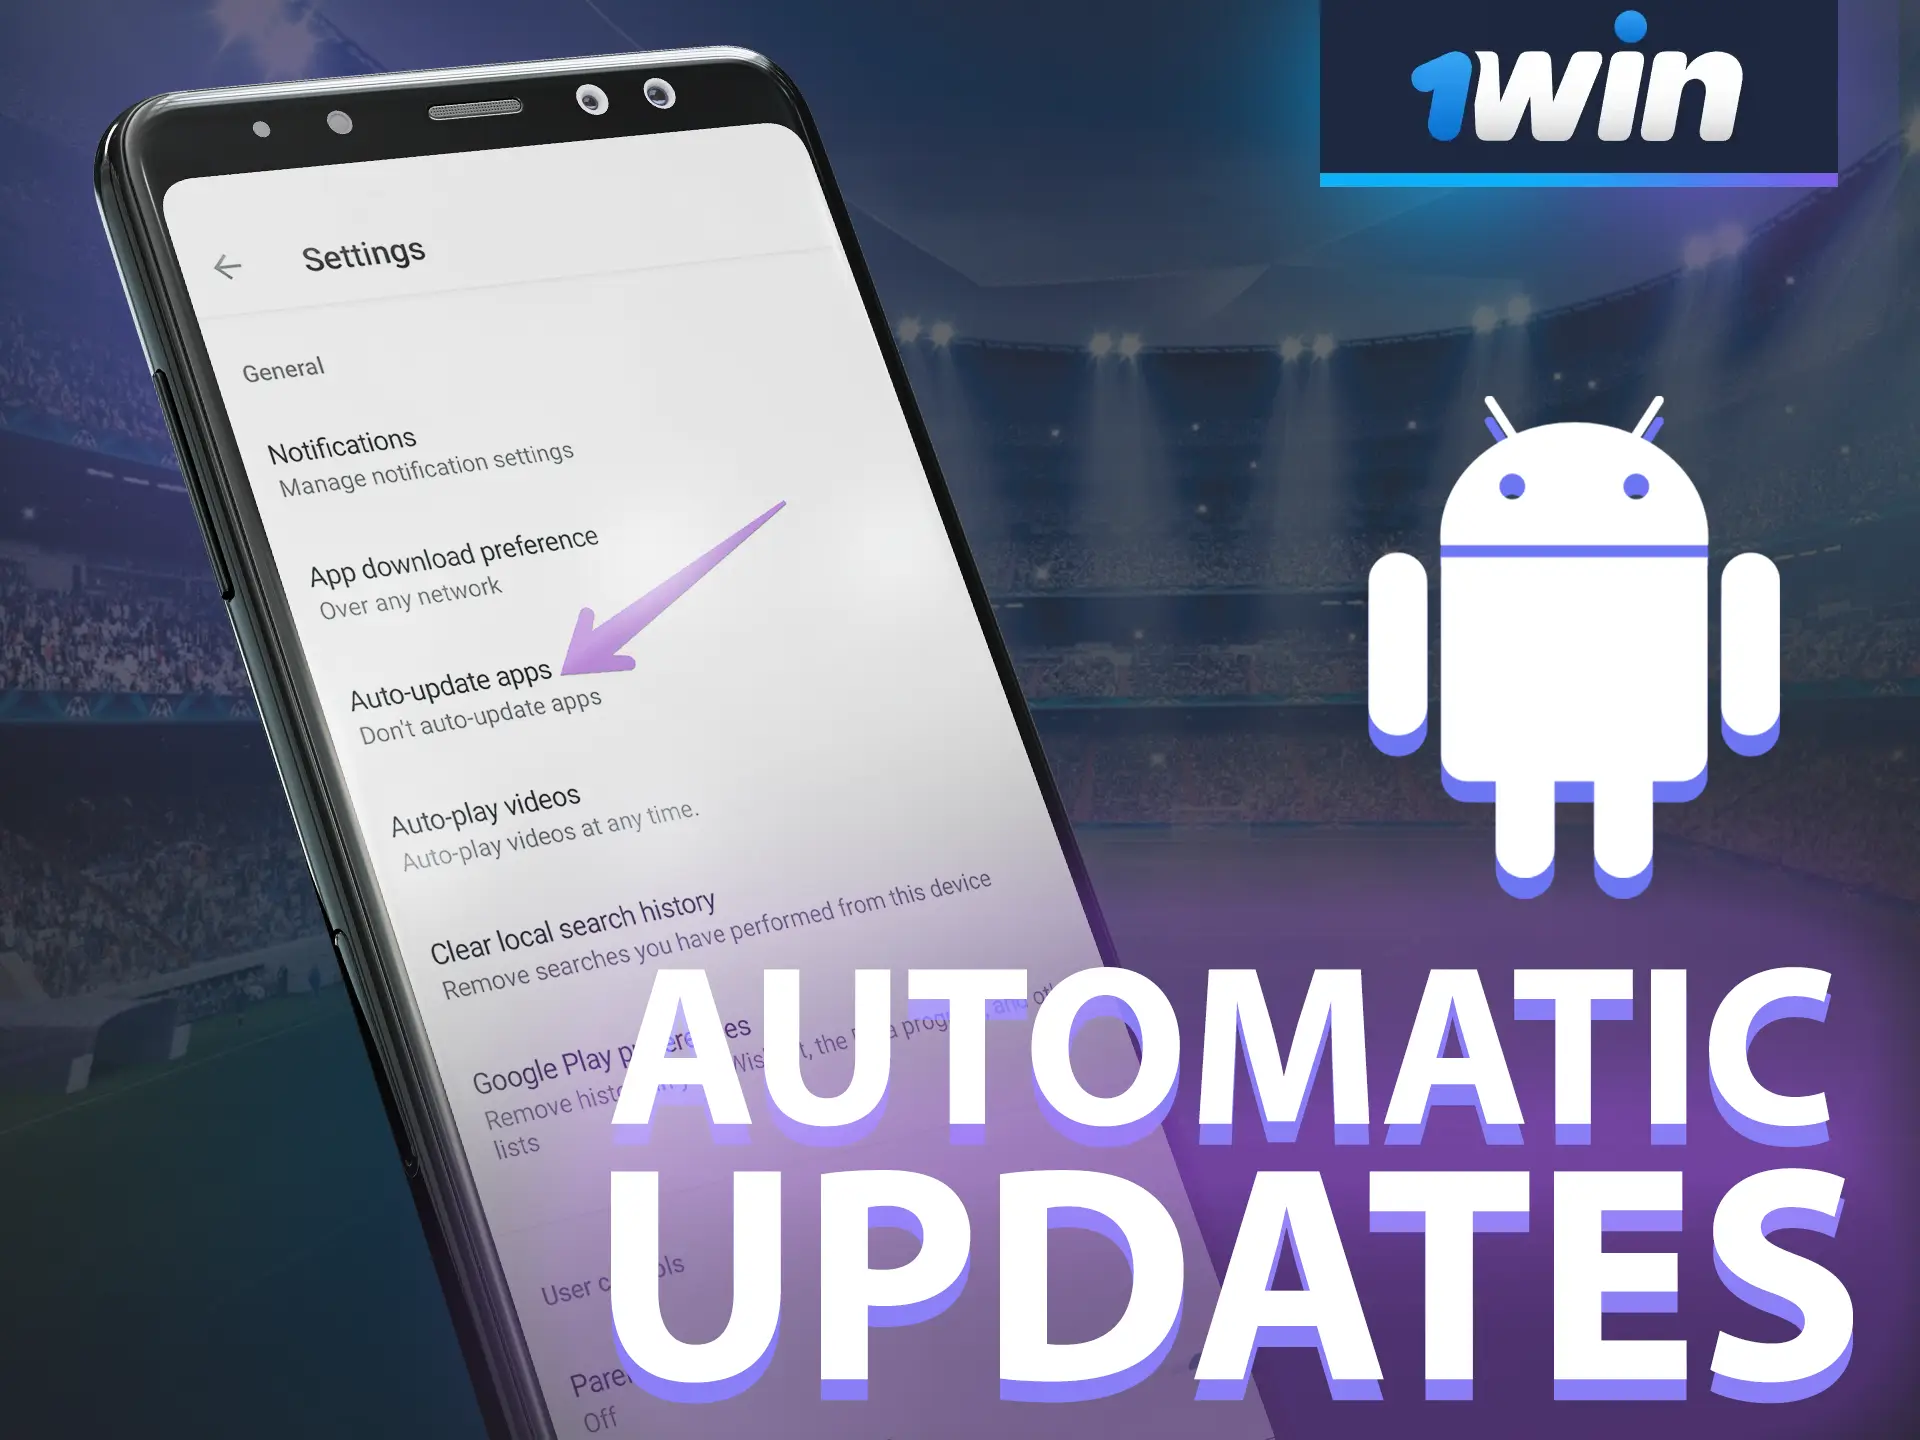 Automatic updates for the 1win app can be configured in your phone's settings.